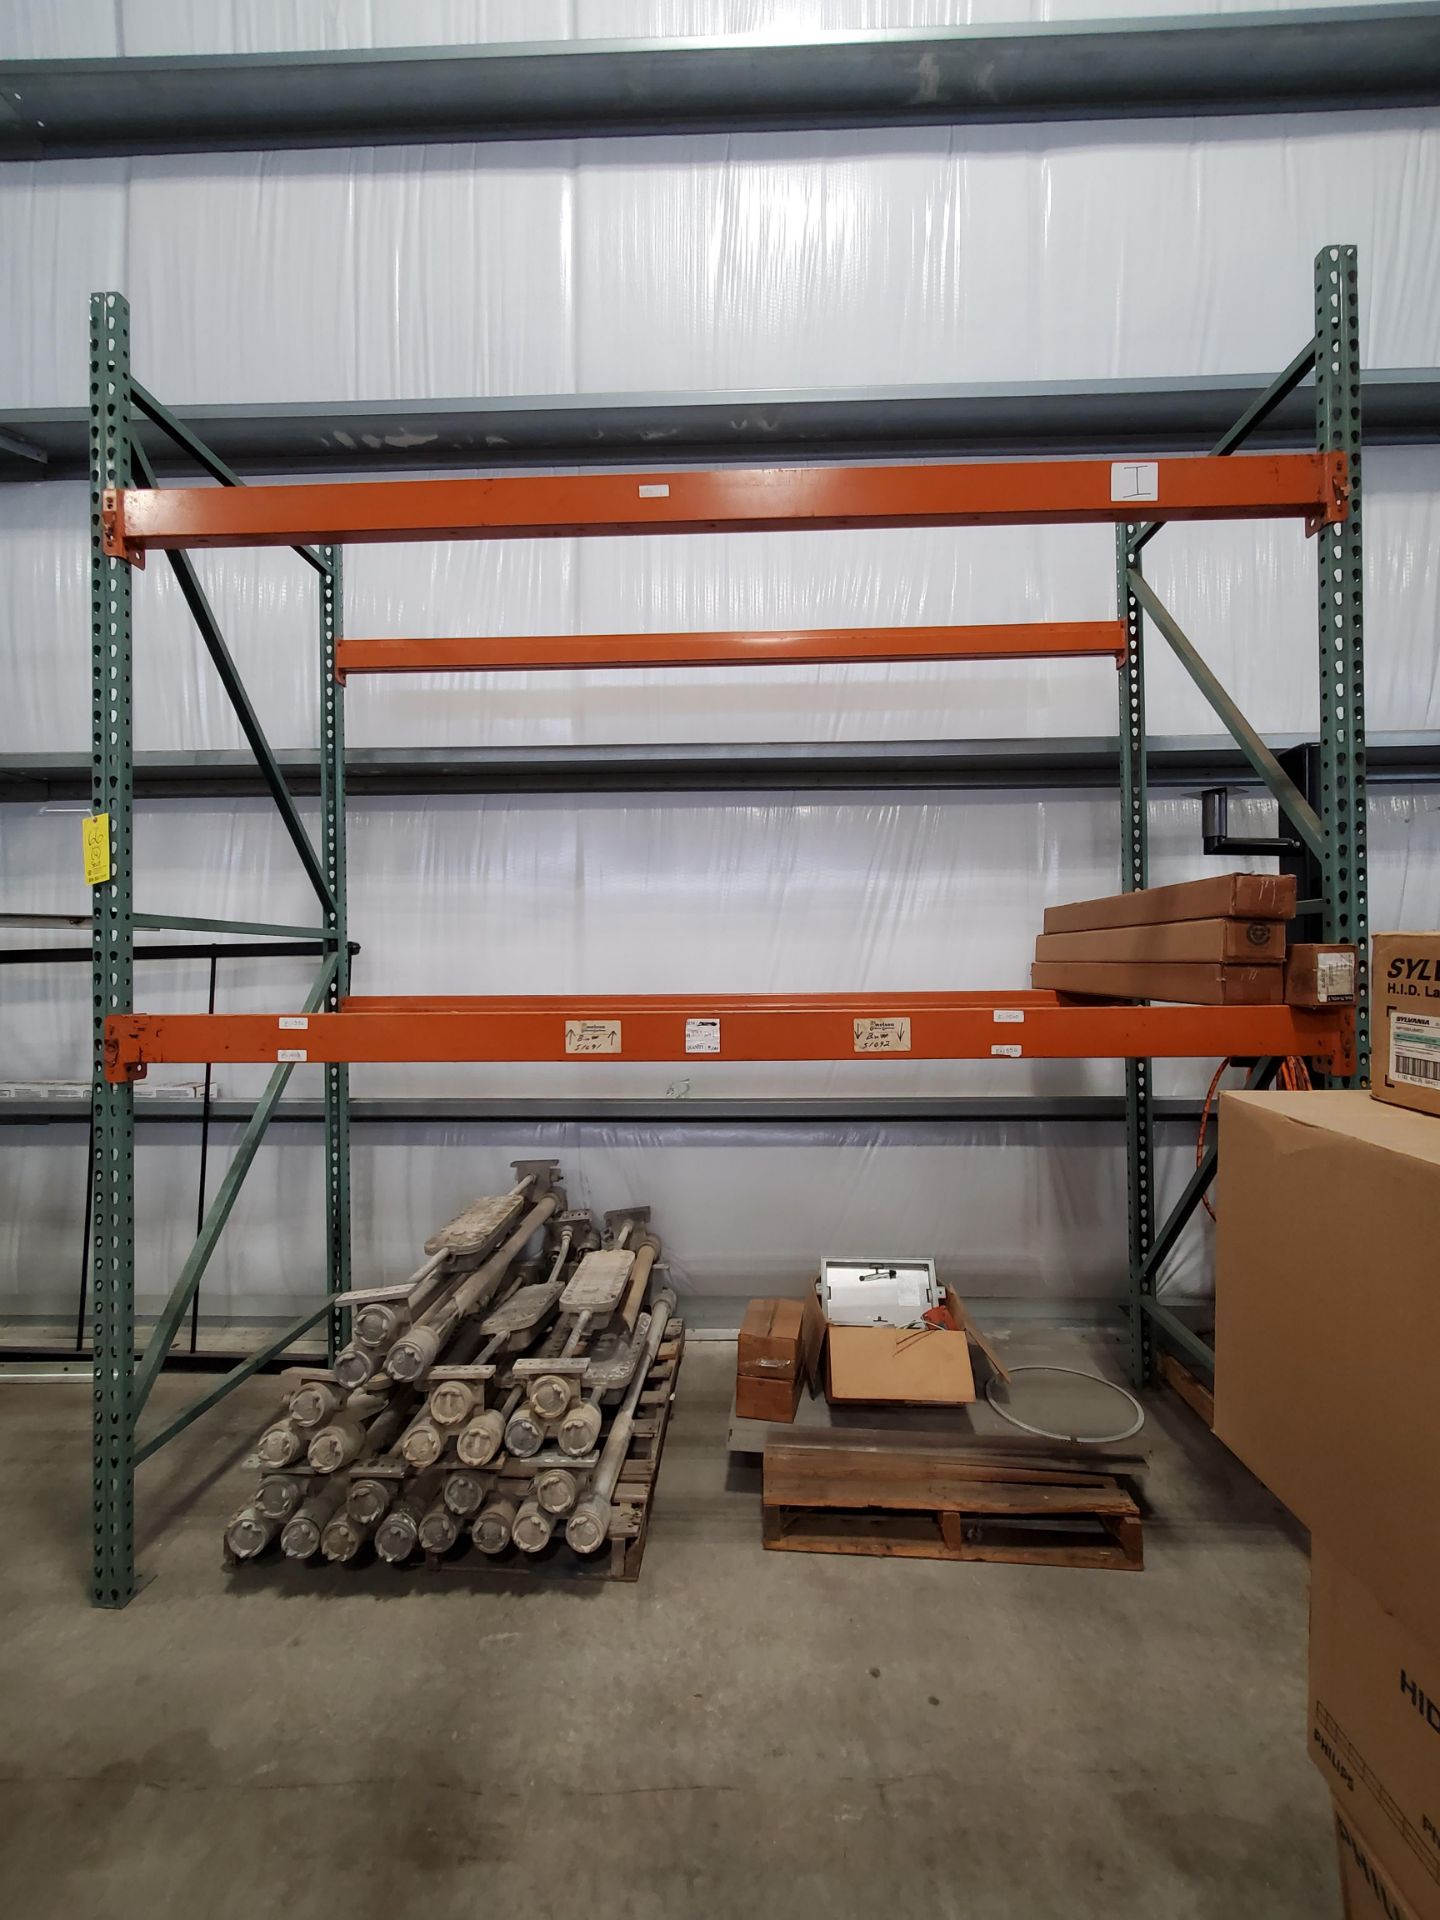 4 Sections Of Pallet Racks (4) 10'x42" Uprights; (4) 9' Crossbeams (Contents Excluded) - Image 4 of 8